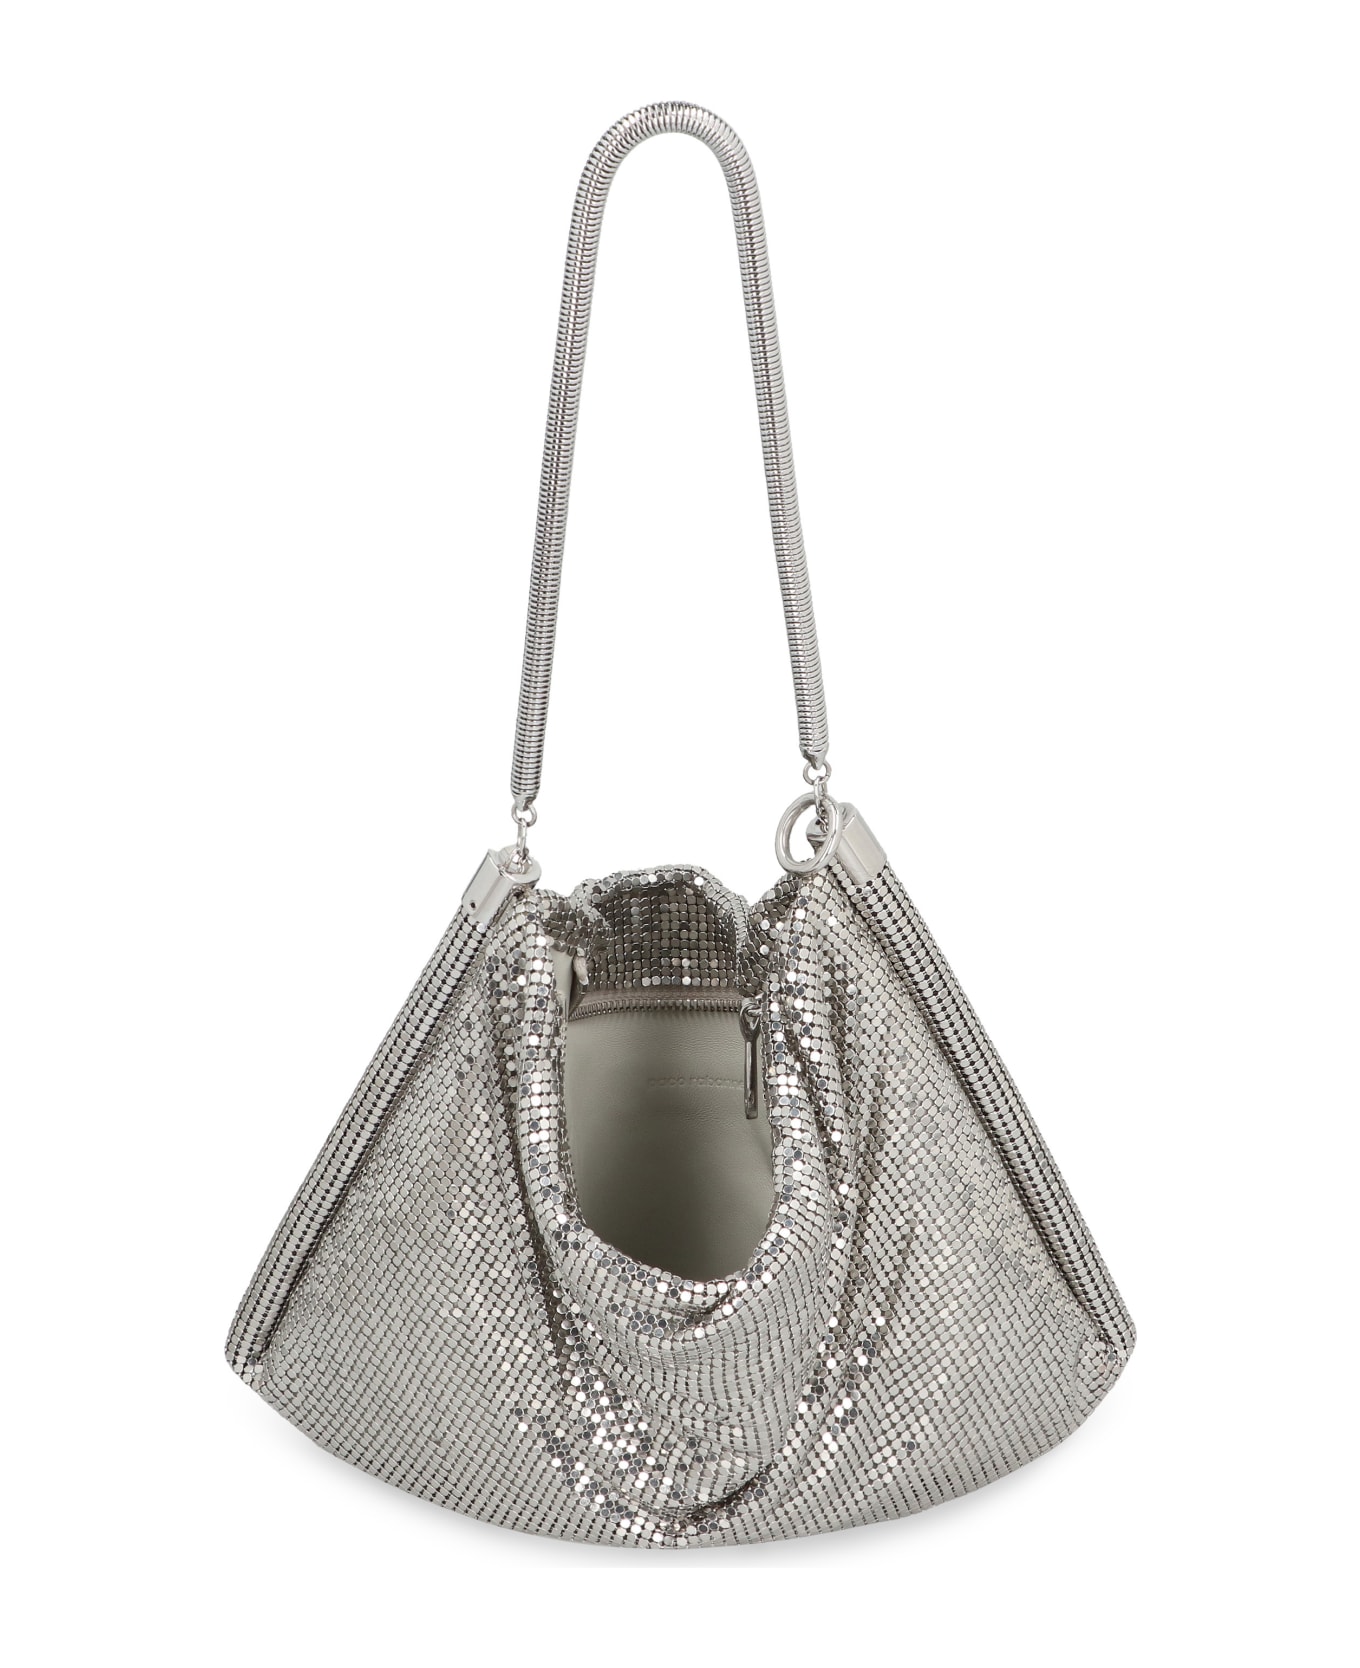 Paco Rabanne Chainmail Pocket Bag - Argento トートバッグ